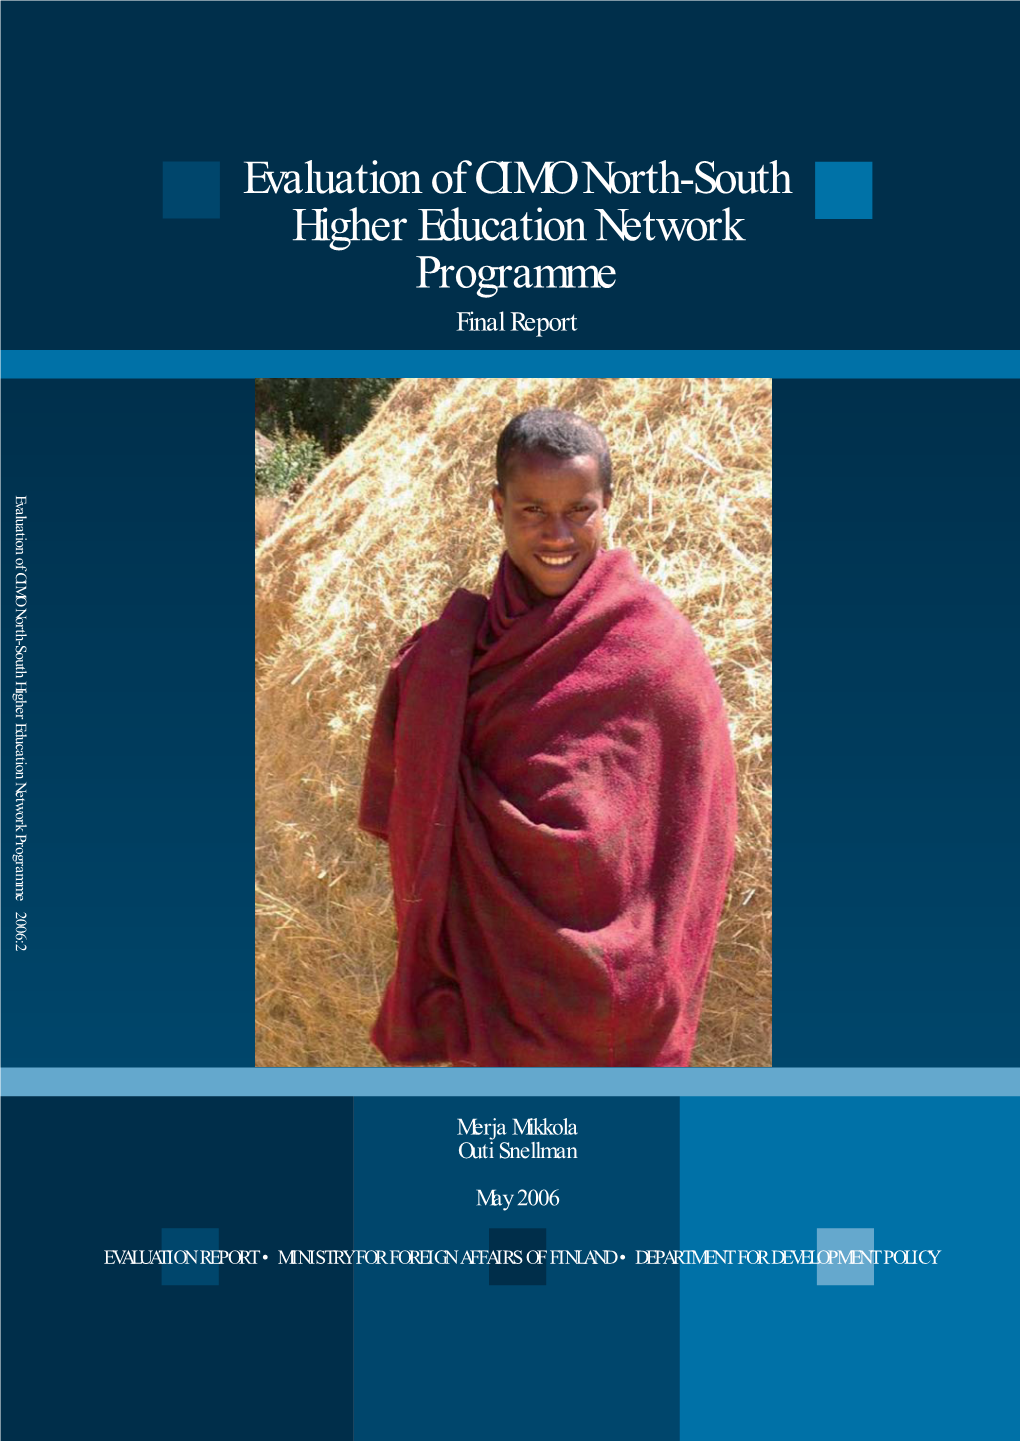 Evaluation of CIMO North-South Higher Education Network Programme Final Report Evaluation of CIMO North-South Higher Education Network Programme 2006:2